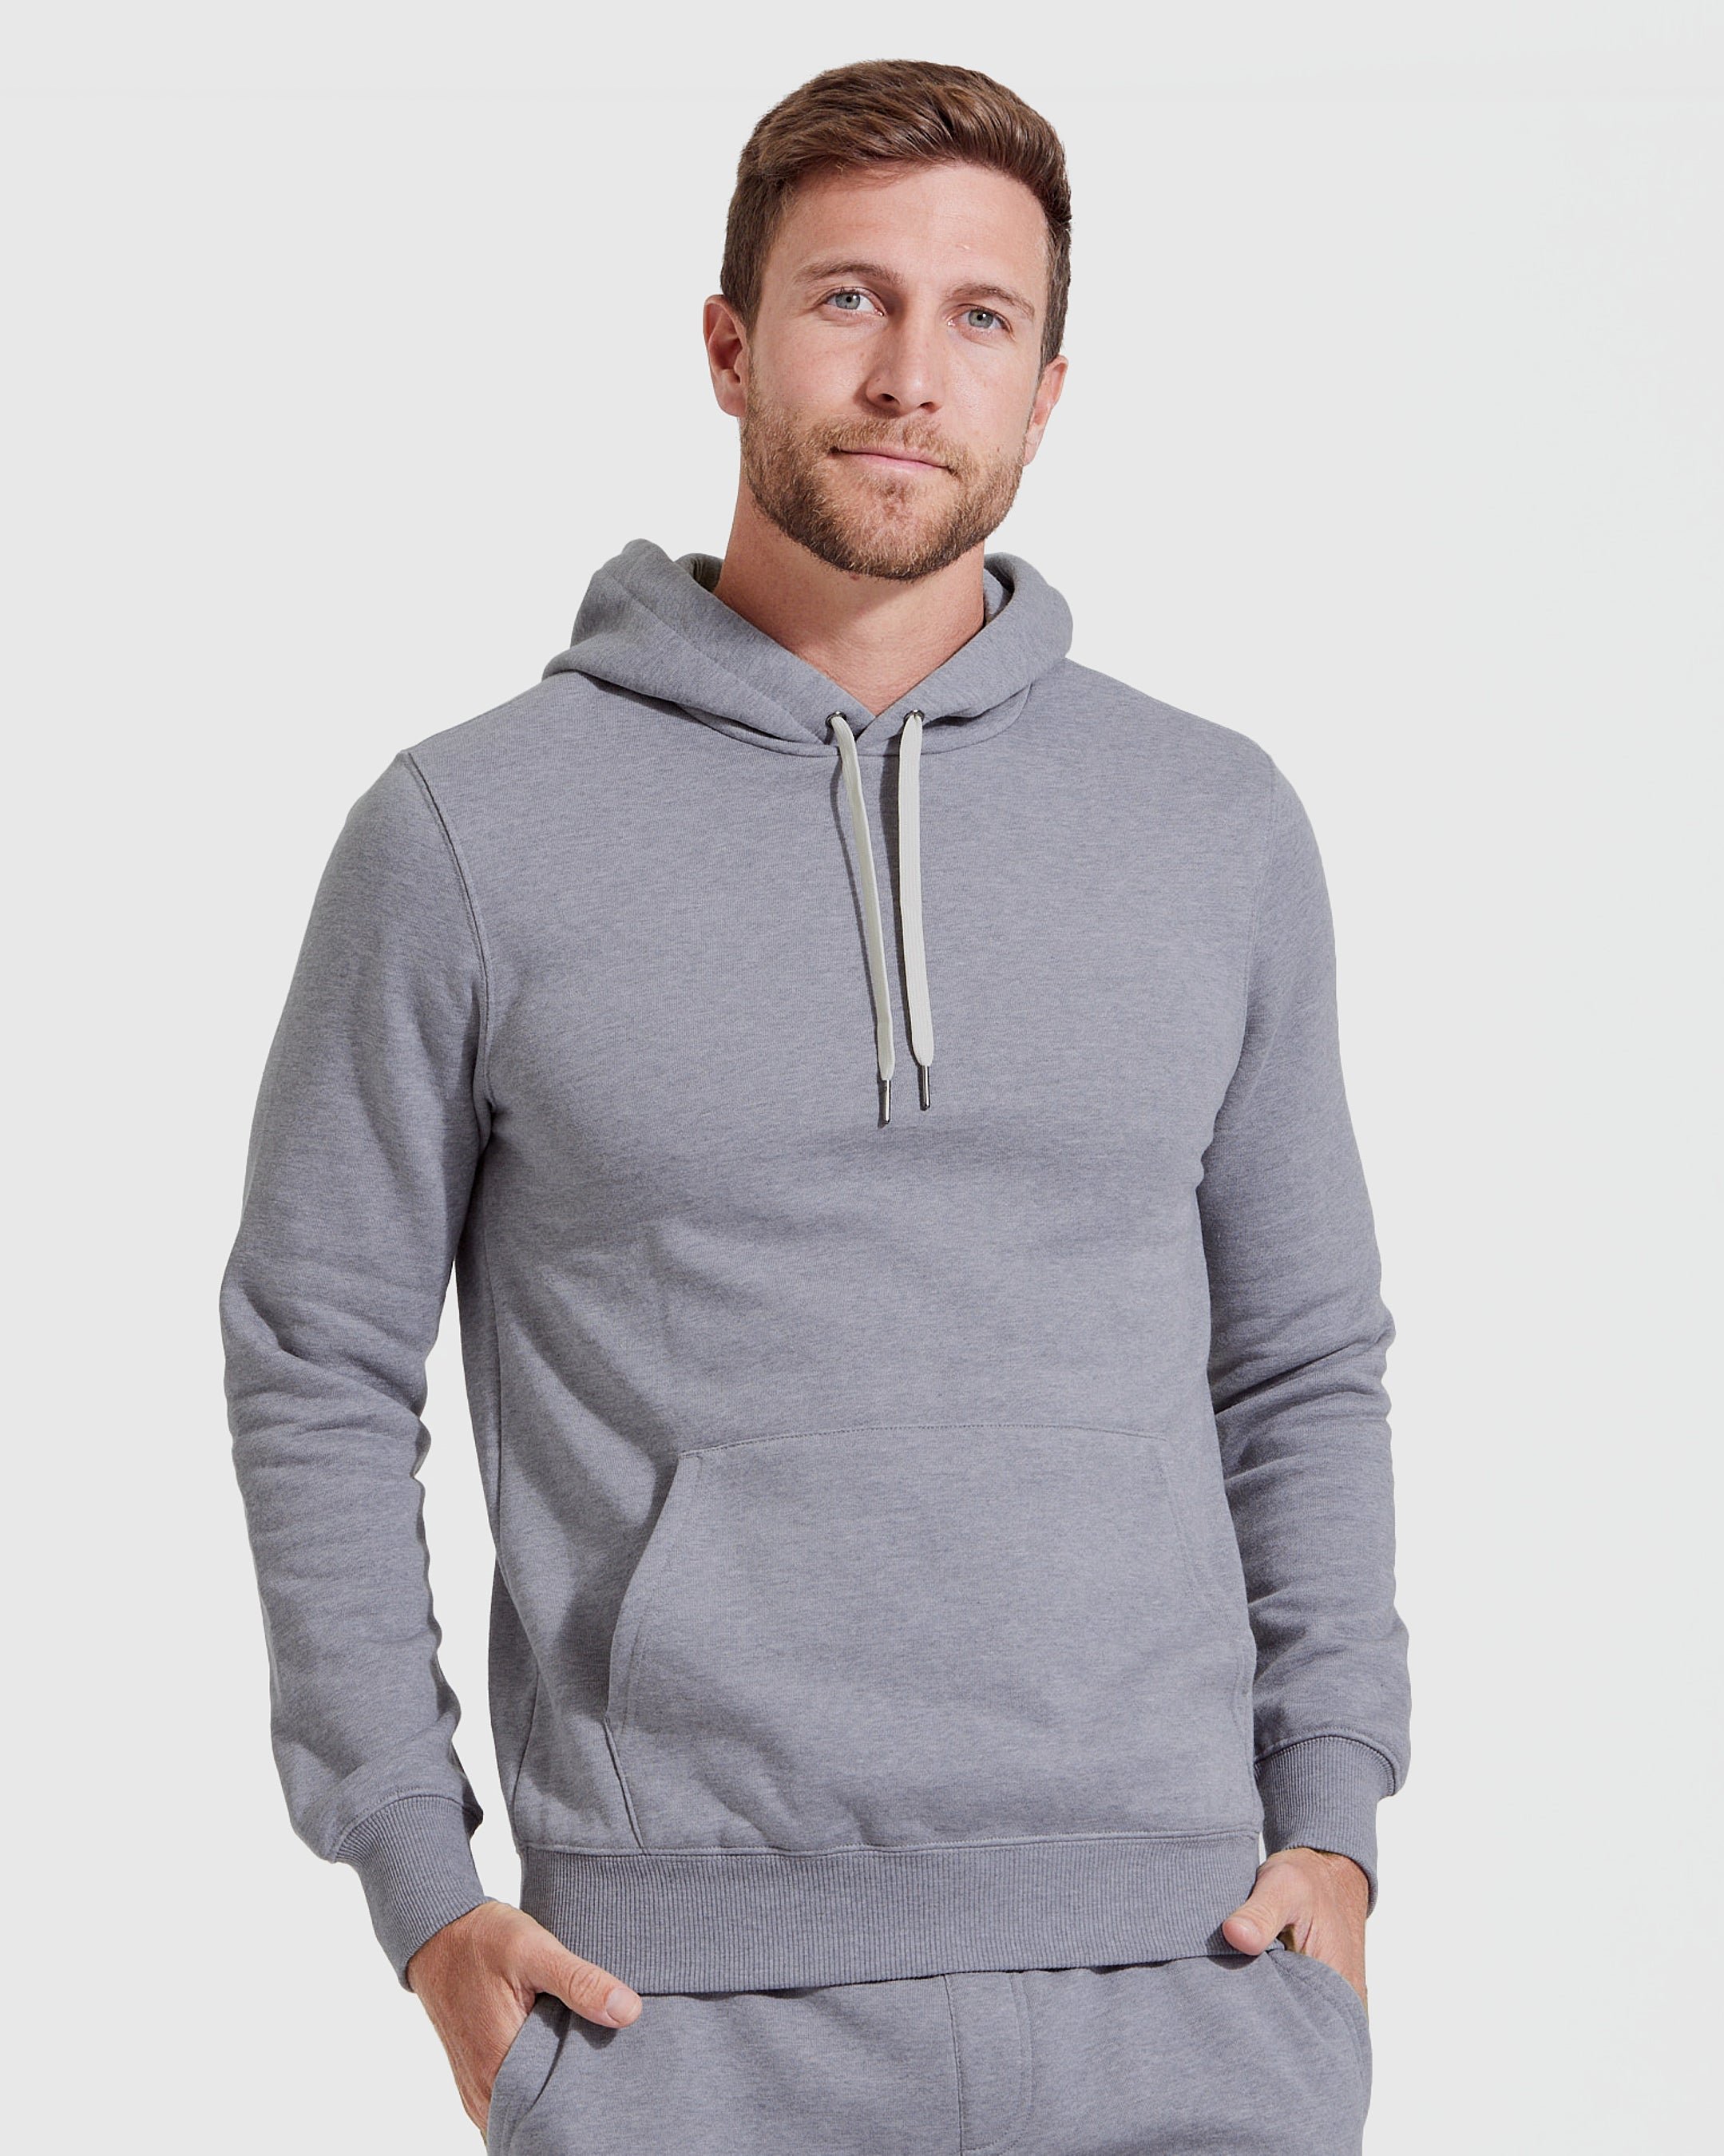 Heather Gray Fleece French Terry Pullover Hoodie